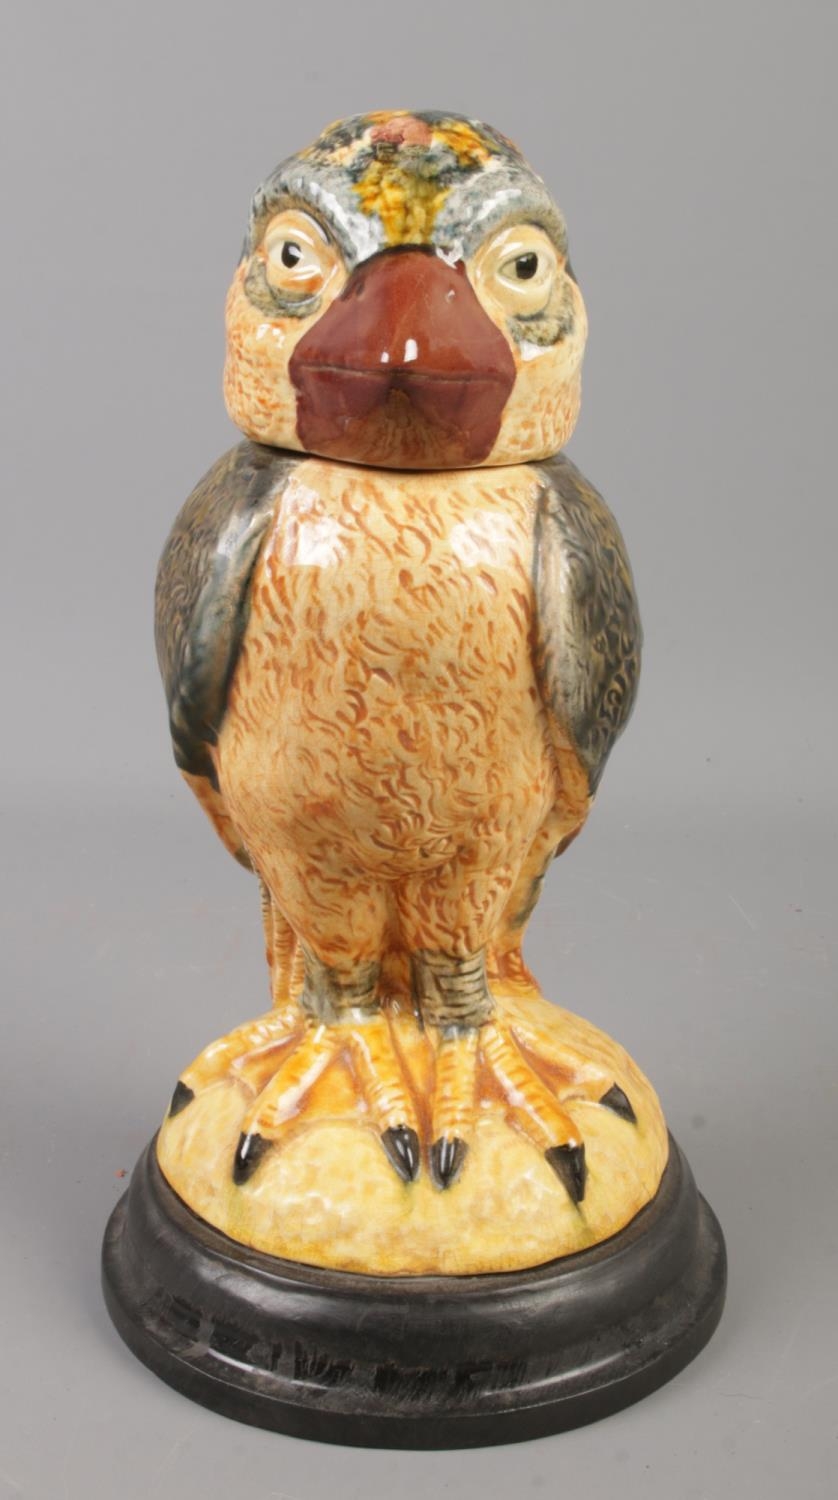 A ceramic jar formed as a grotesque bird in the style of Martin Brothers. 24.5cm.